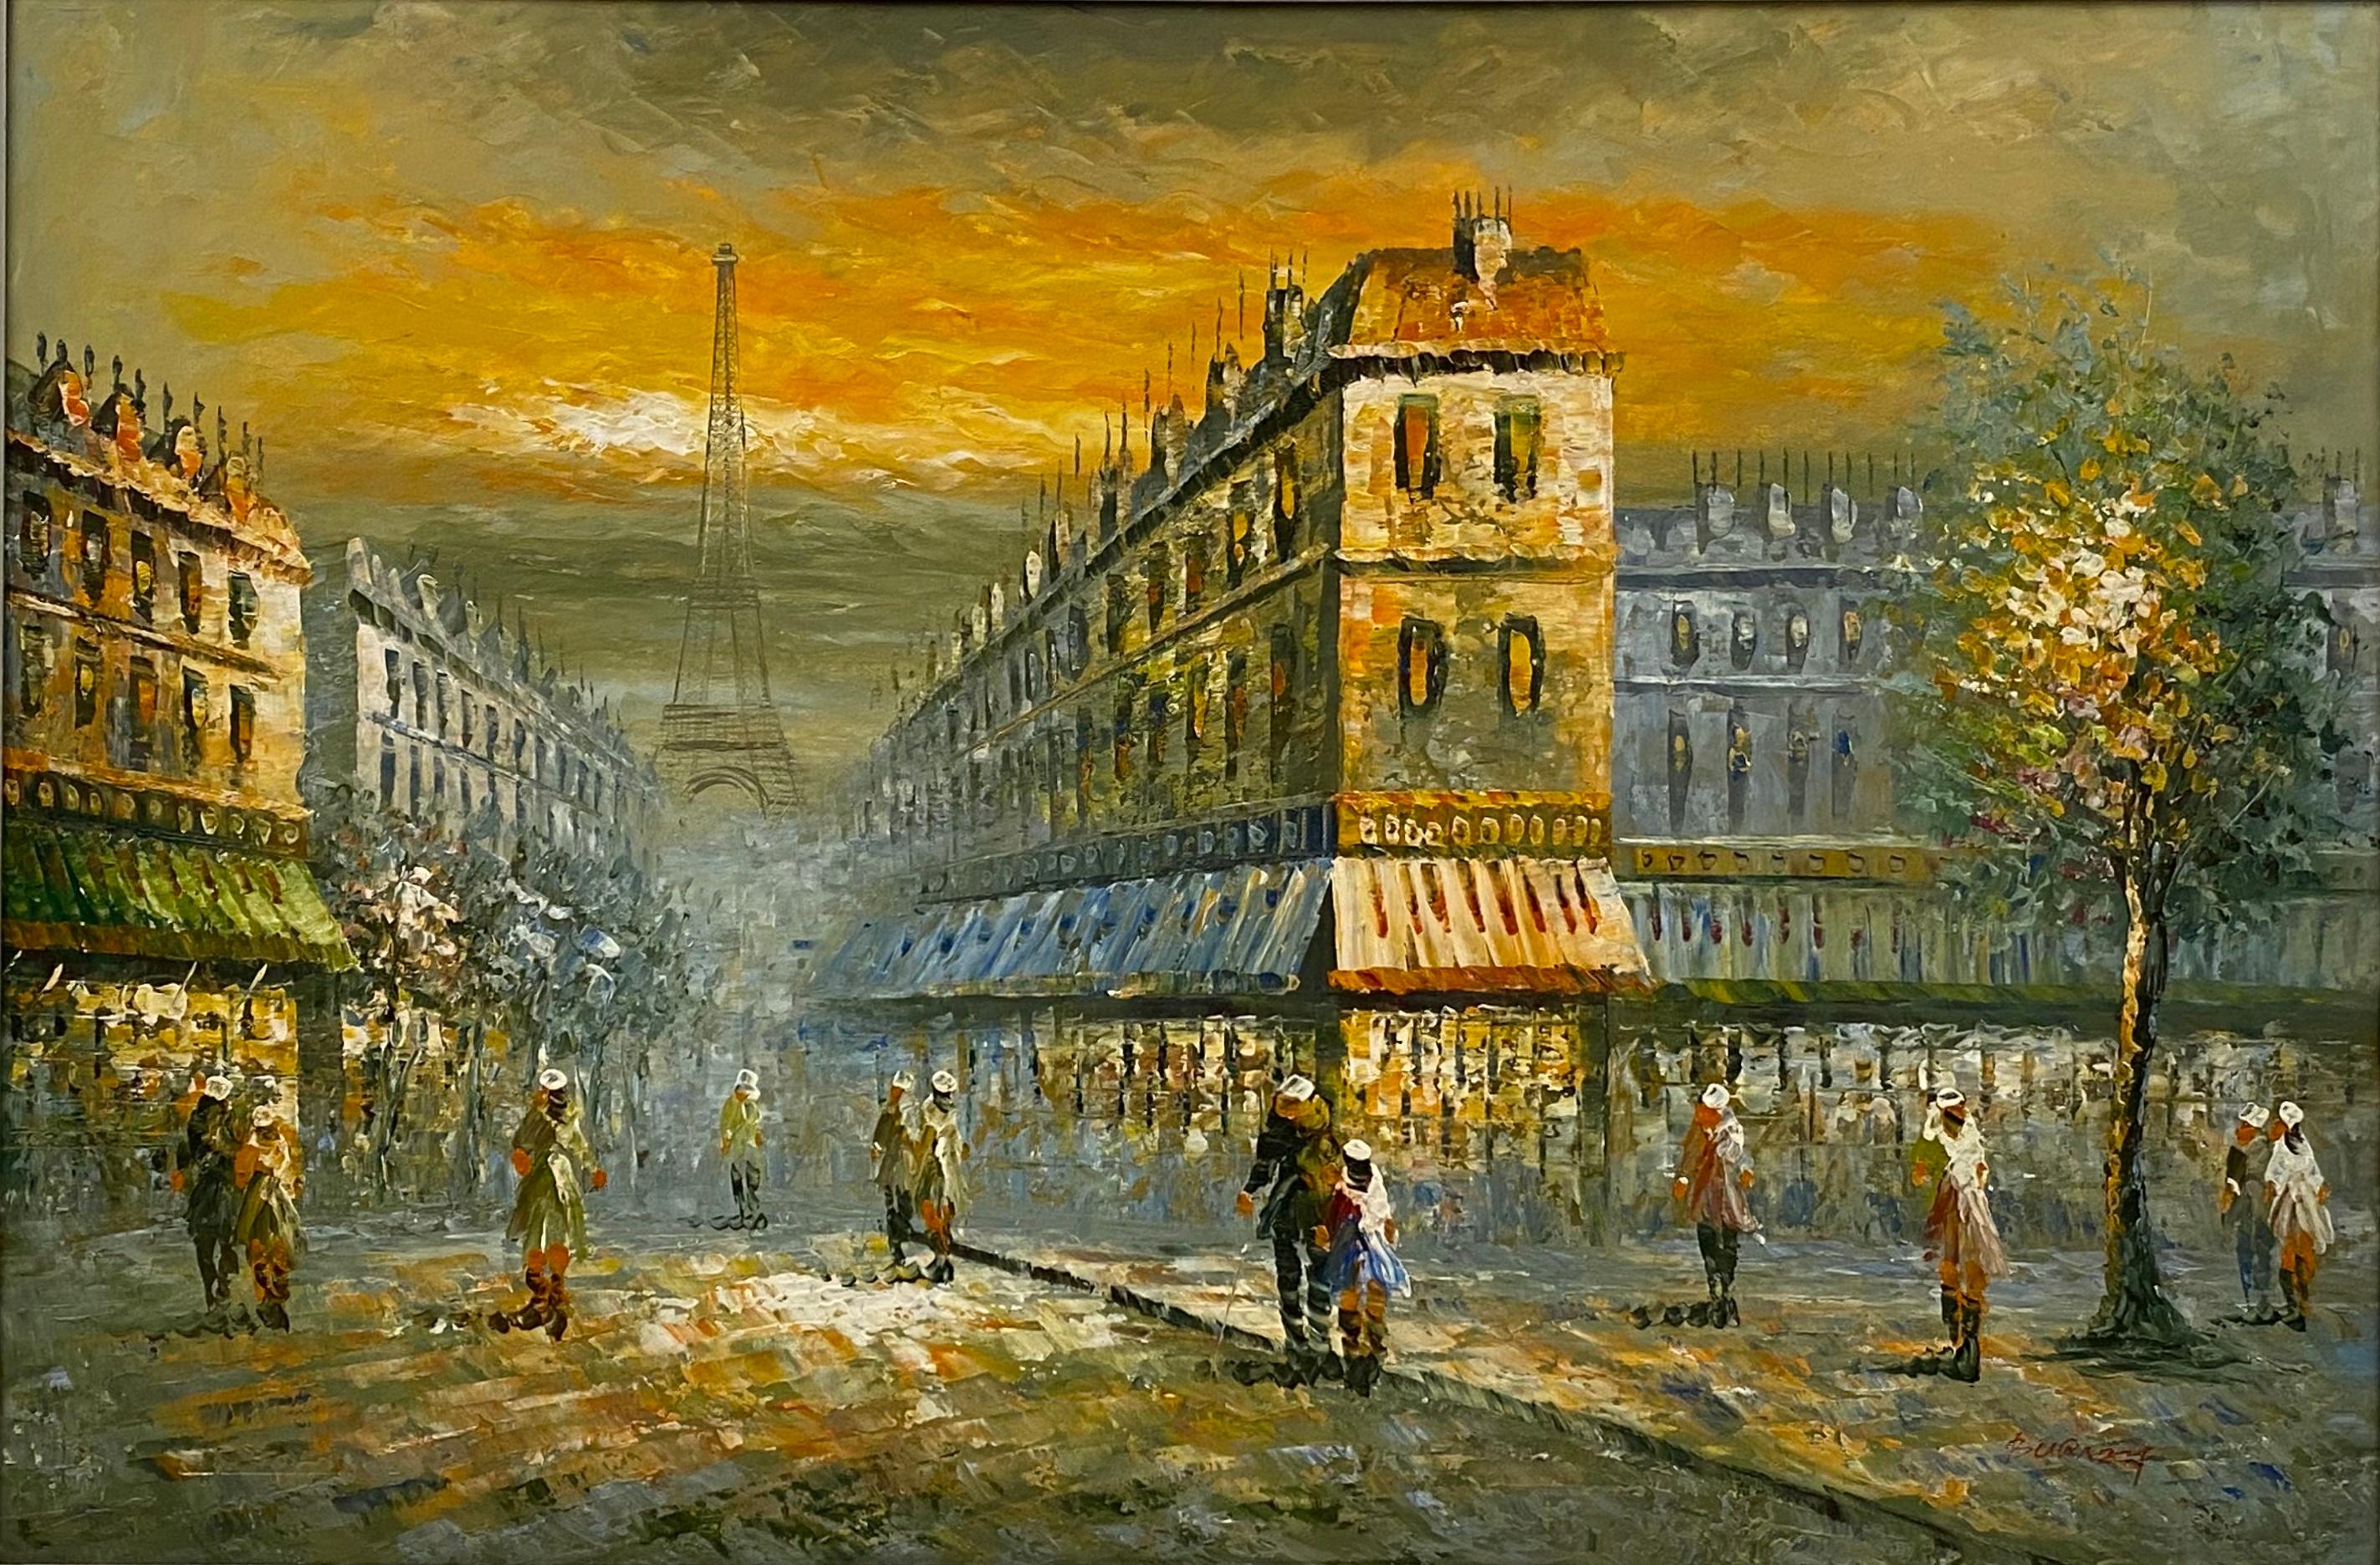 A beautiful view of a street scene in Paris, France. This painting perfectly depicts life in Paris with its restaurants, busy streets, cafes, hotels, monuments, and wonderful architecture. The location is near the Eiffel Tower.
Signed.
Attributed to